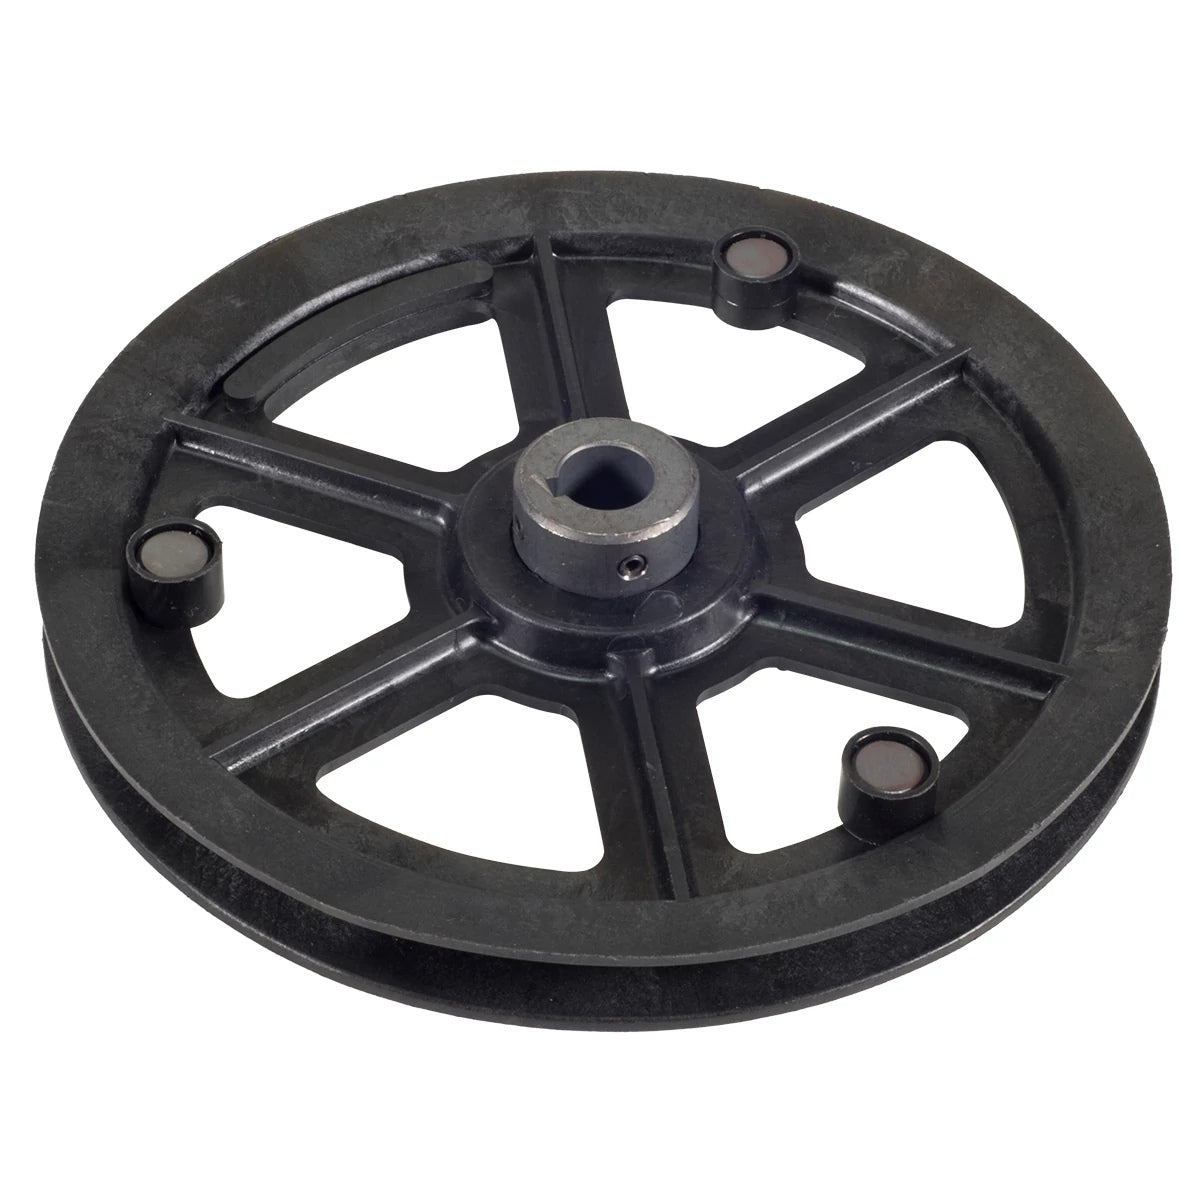 Liftmaster K17-2701 Replacement Pulley